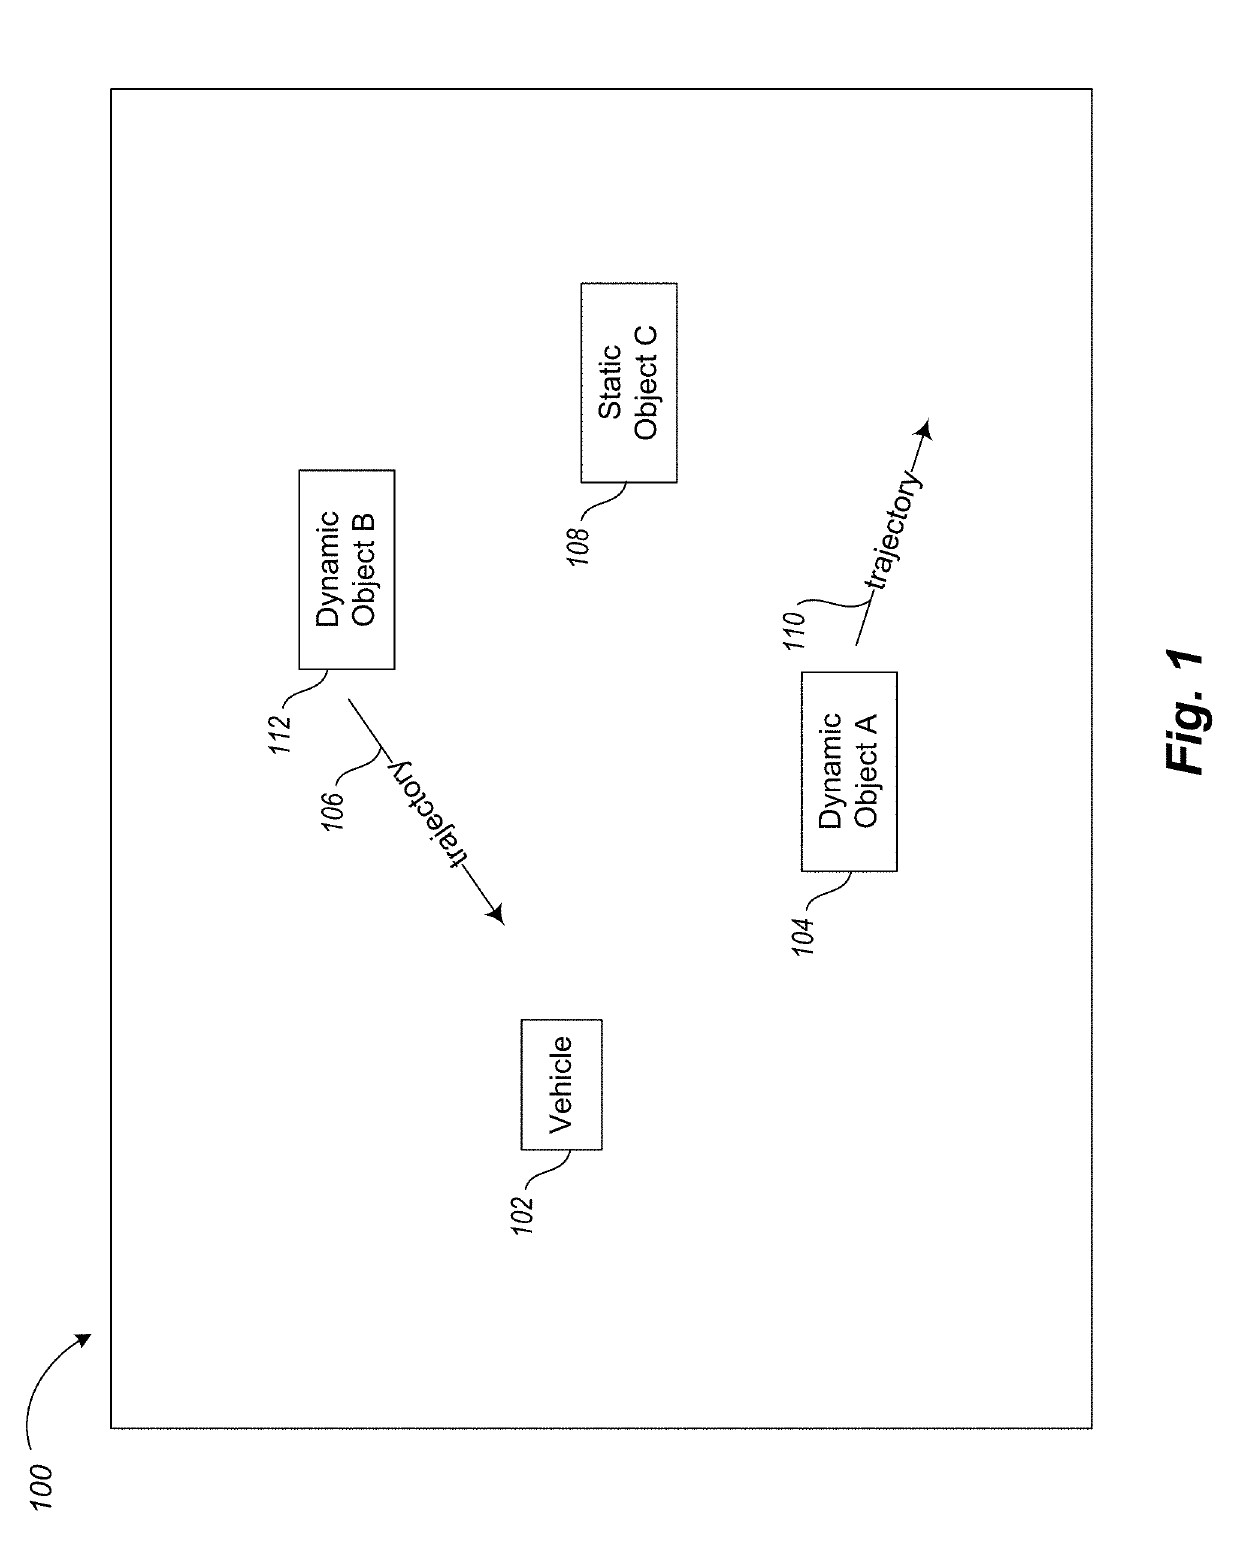 Apparatus, method and article to facilitate motion planning of an autonomous vehicle in an environment having dynamic objects